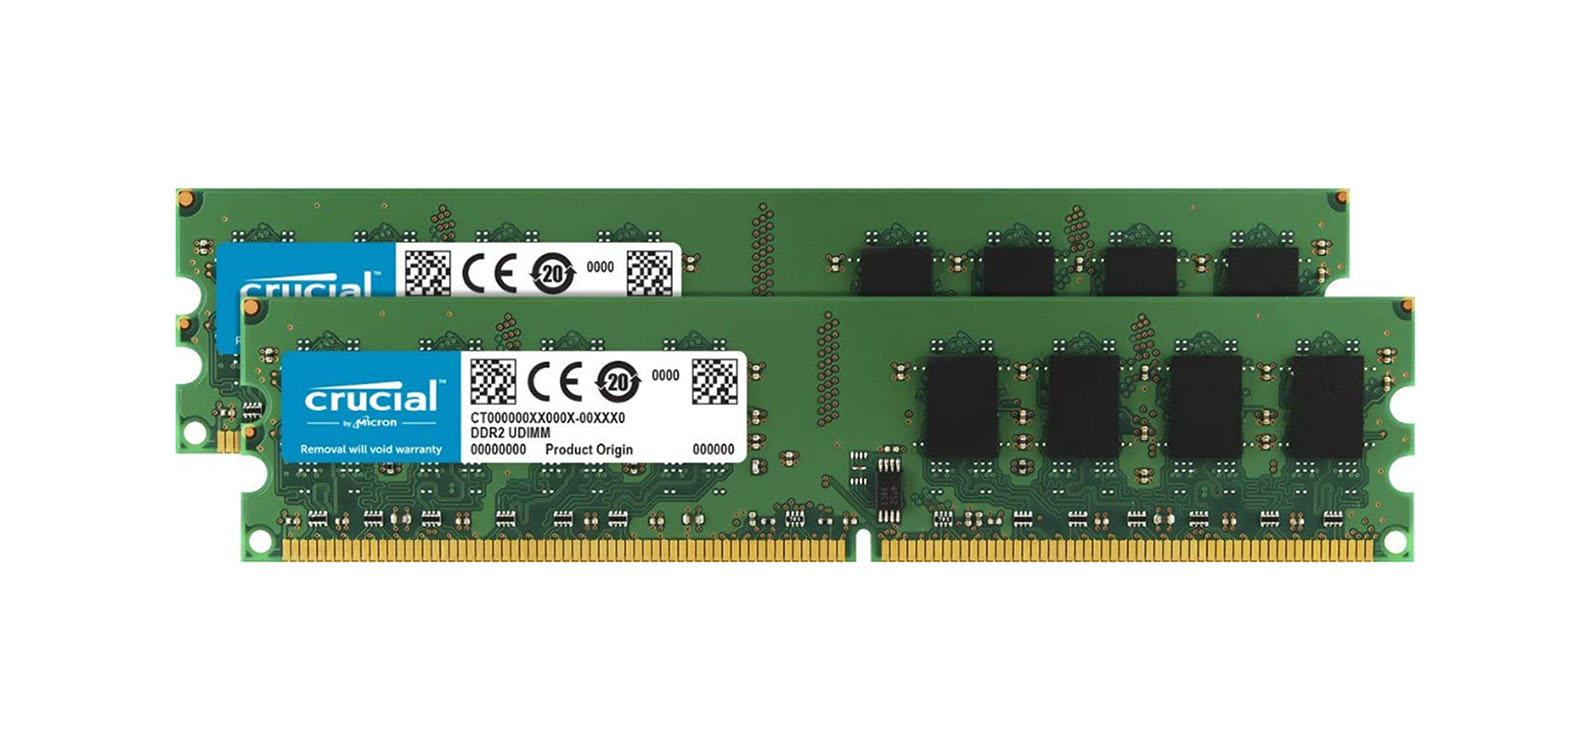 Crucial CT553038 8GB Kit (2 x 4GB) DDR2-667MHz PC2-5300 ECC Fully Buffered CL5 240-Pin DIMM Memory upgrade for Supermicro SUPER X7DA8